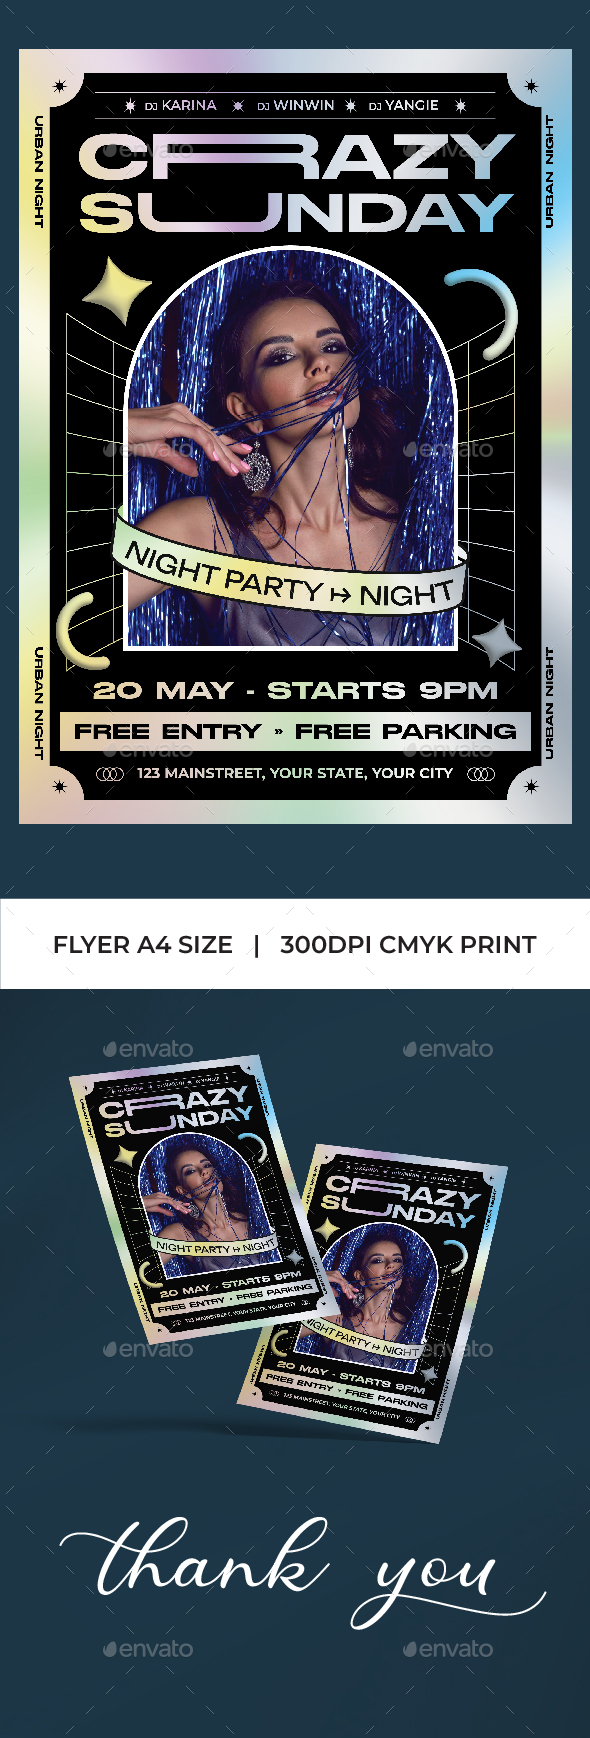 [DOWNLOAD]Night Party Flyer